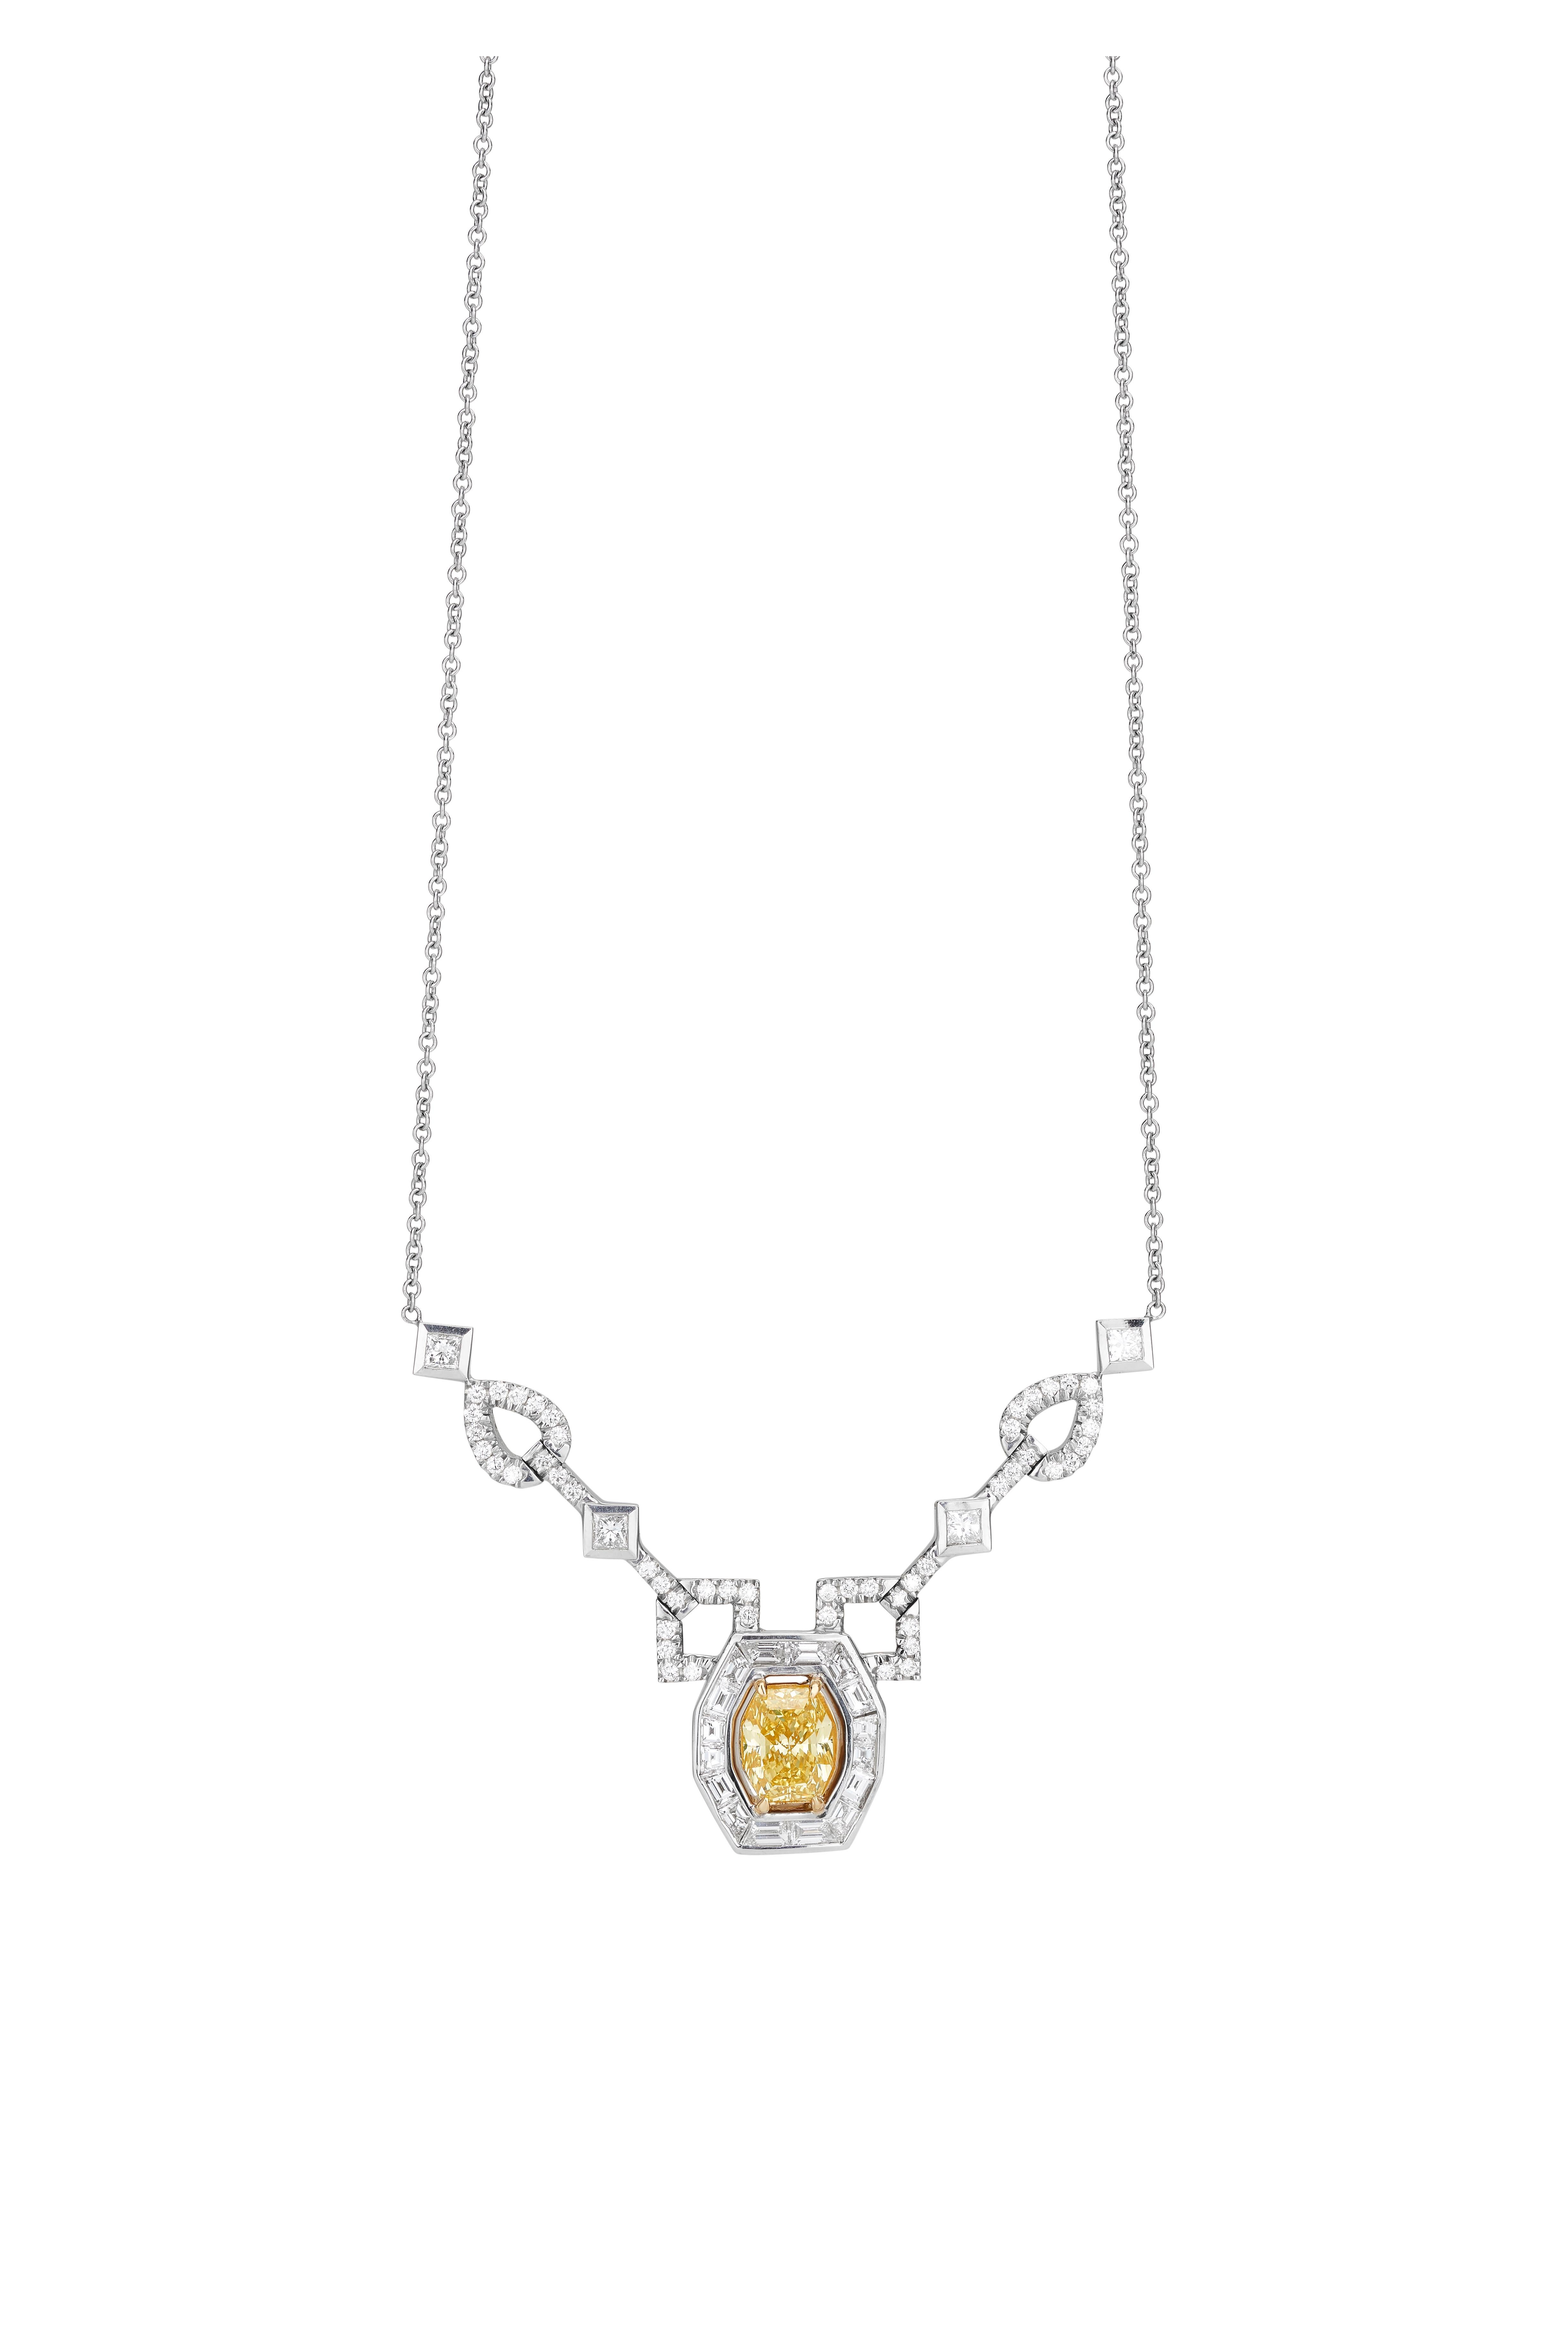 Contemporary 18 Karat Yellow and White Gold with Fancy Yellow Diamond Necklace 3.03 FY  For Sale